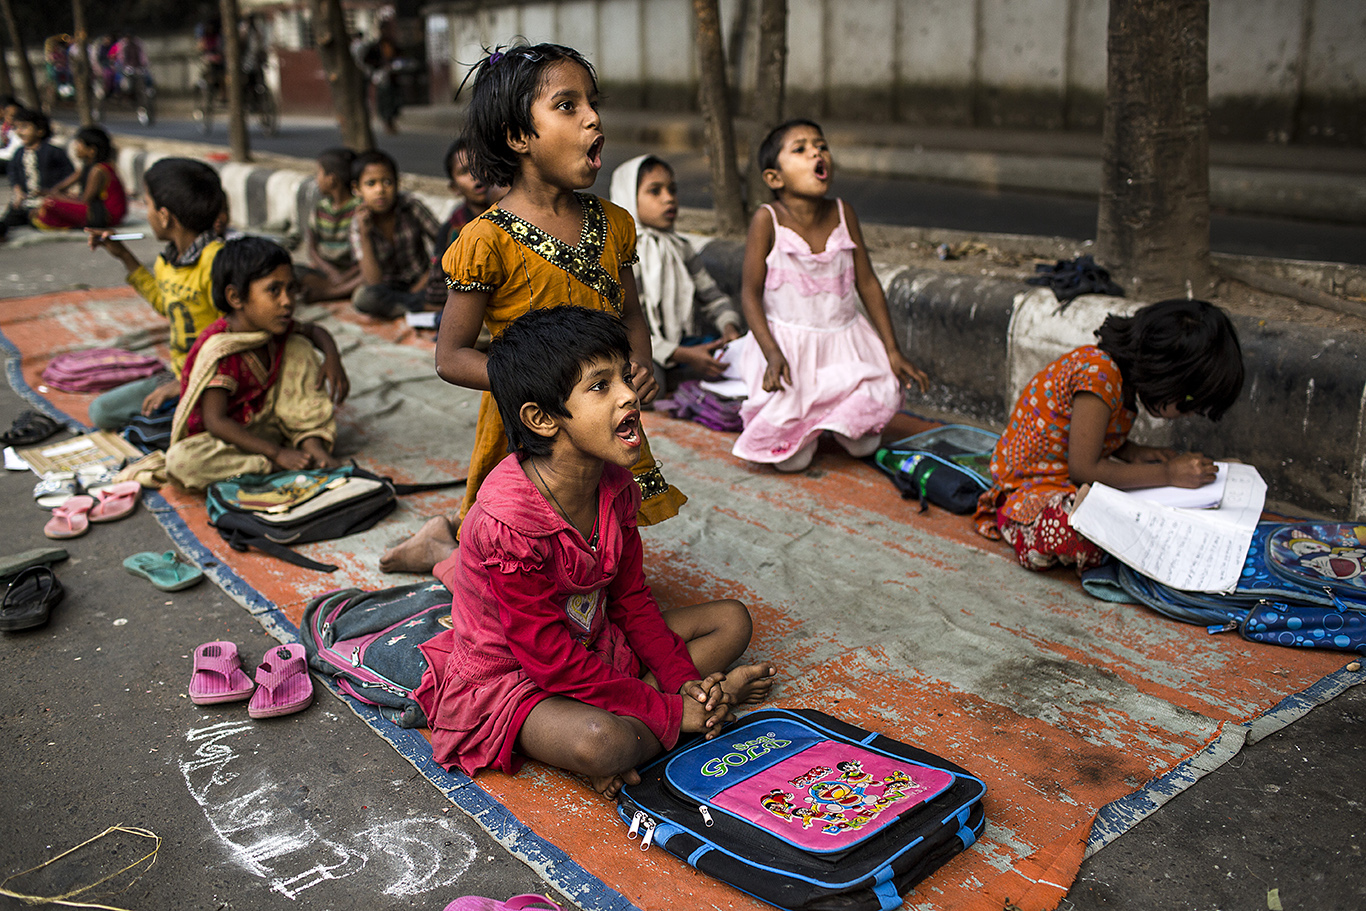 A group of children attend to a class at a makeshift street school in Shahbag area, situated at the heart of Dhaka. They are slum dwellers or orphans who receive classes several days per week by foundations and individuals helping in the education of street children. Dhaka has been named, according to several reports, the worst city in the world to live in.